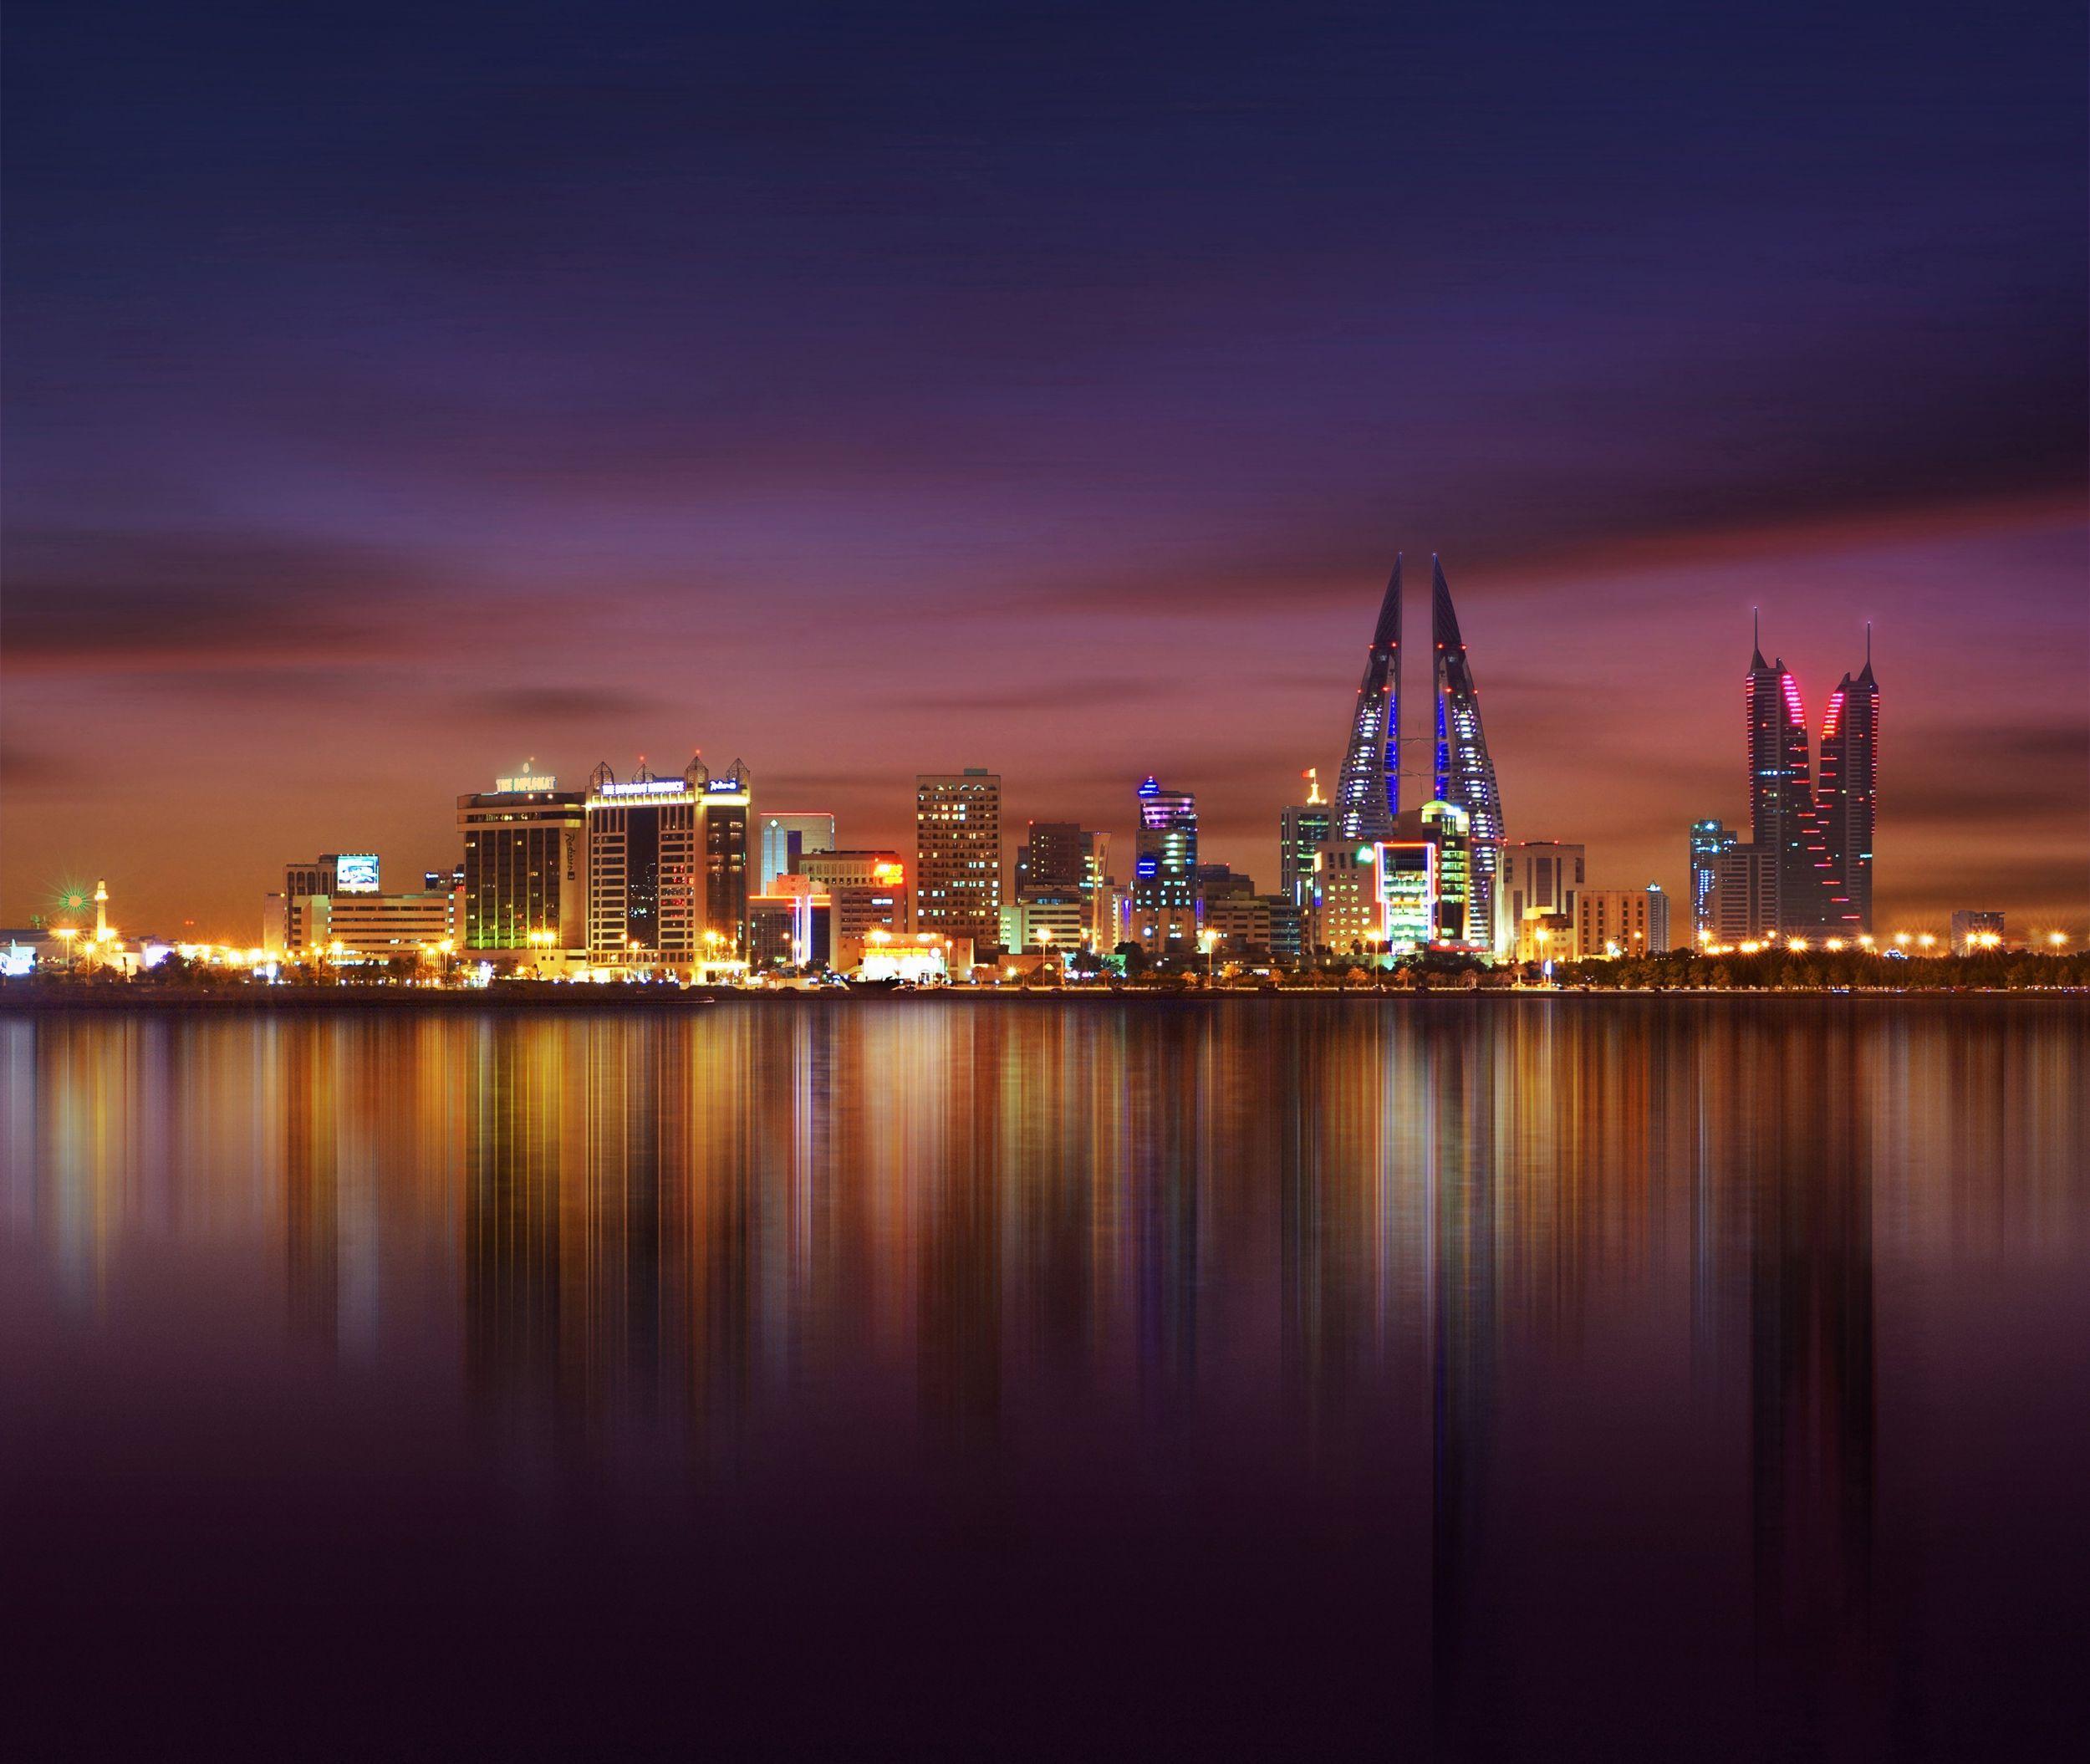 New Bahrain Wallpapers and Pictures Graphics download for free